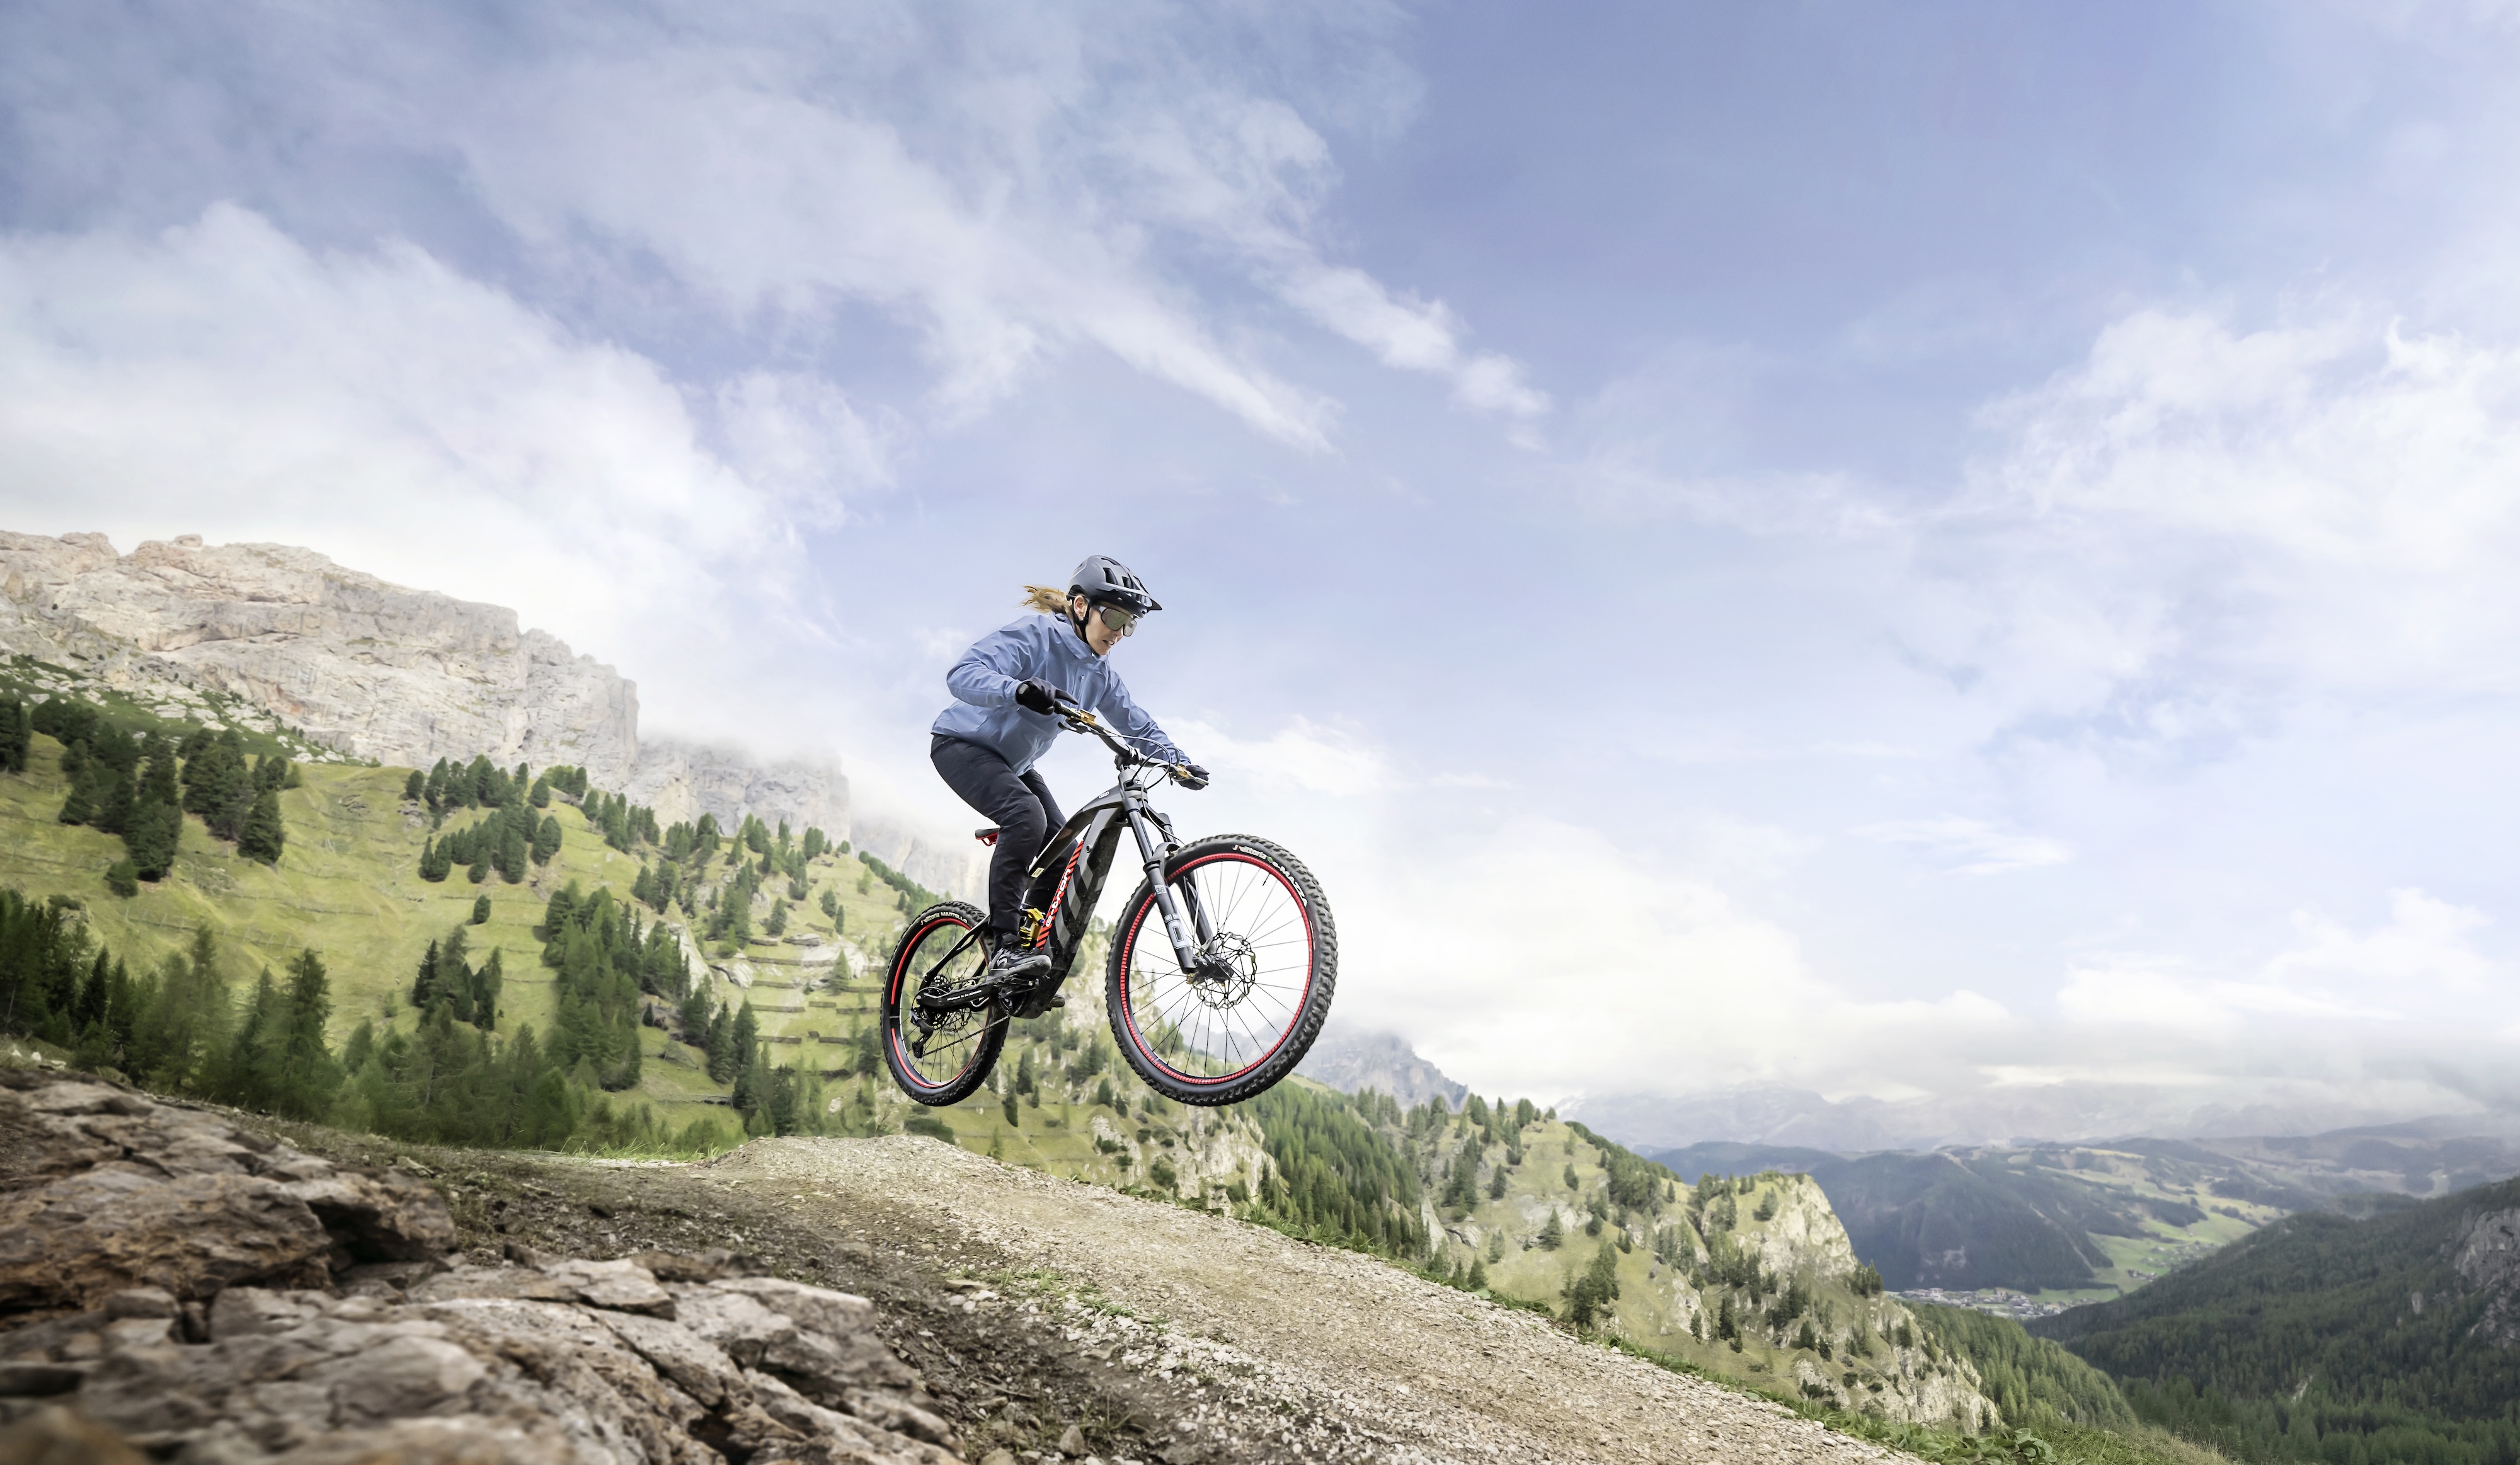 A mountain biker jumping on the new Audi eMTB